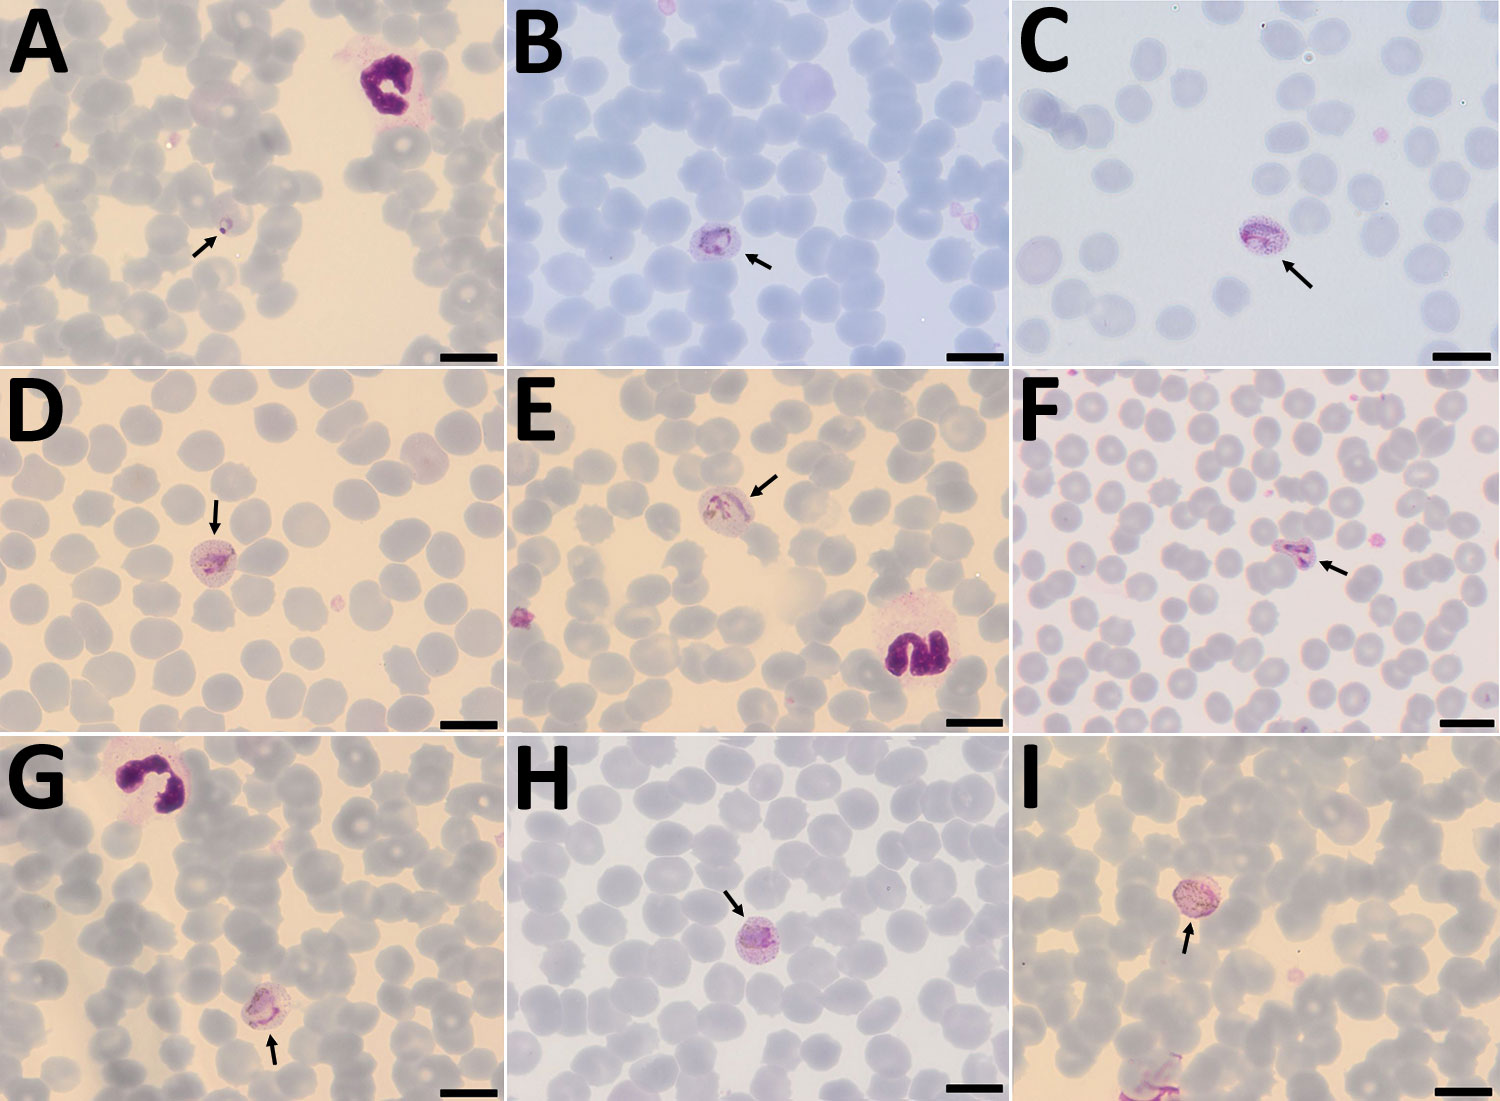 Plasmodium cynomolgi parasites in a Giemsa-stained thin smears of blood from a traveler returning from Southeast Asia to Denmark. Overall, few parasites were visible in the thin film, and no schizonts were visible at all. A) Young trophozoite. The cytoplasm is ring shaped, and the nucleus is spherical. The erythrocyte is not enlarged, and neither Schüffner’s dots nor pigment are visible. B) Growing trophozoite. The young parasite is ring shaped and takes up more than half of the diameter of the 